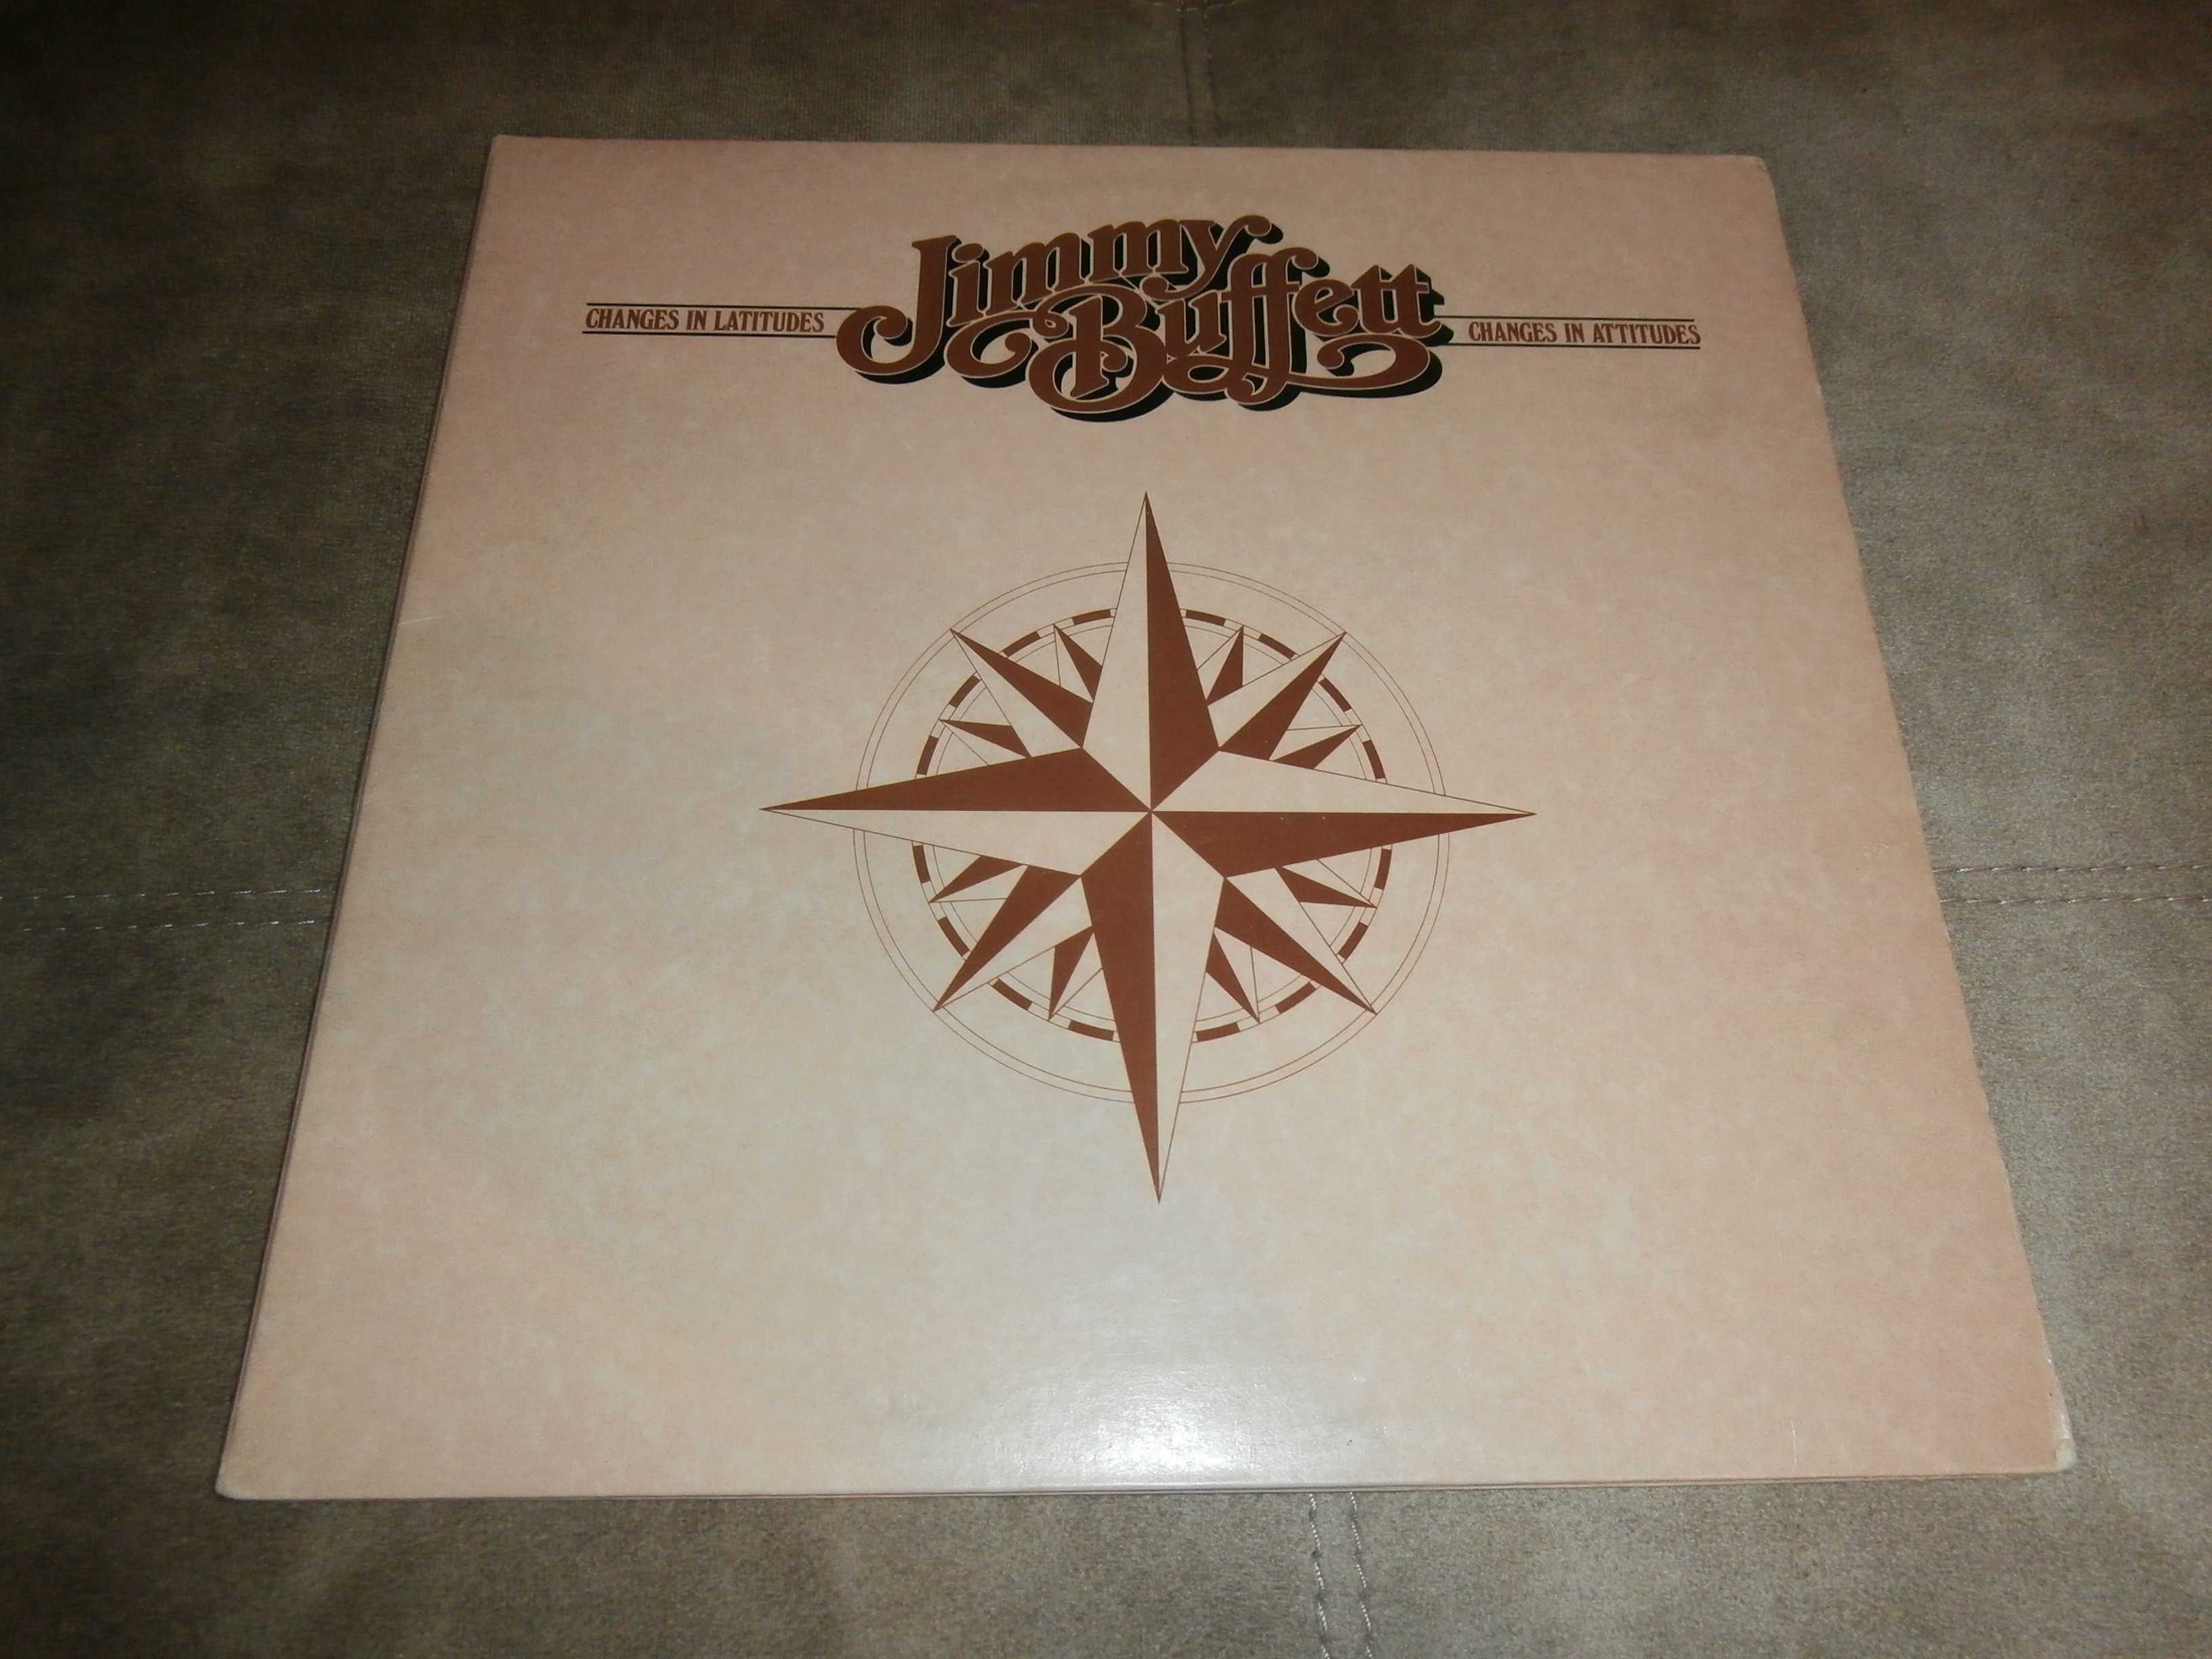 Jimmy Buffet "Changes In Latitudes, Changes In Attitudes" 1977 (винил)